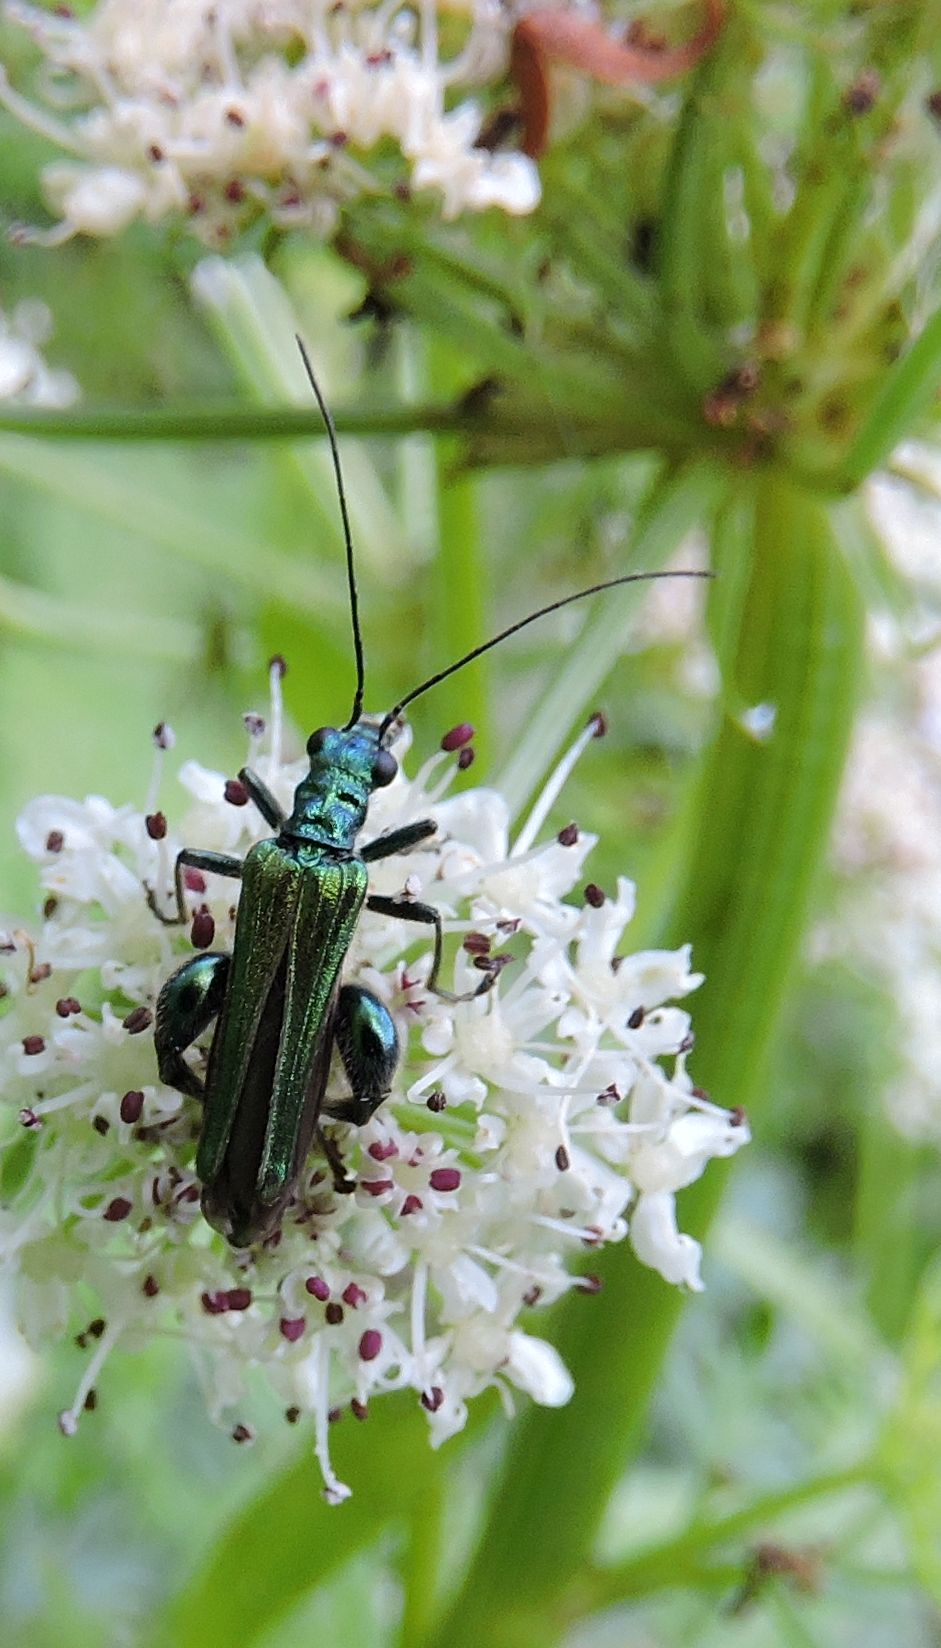 Swollen thighed Flower Beetle